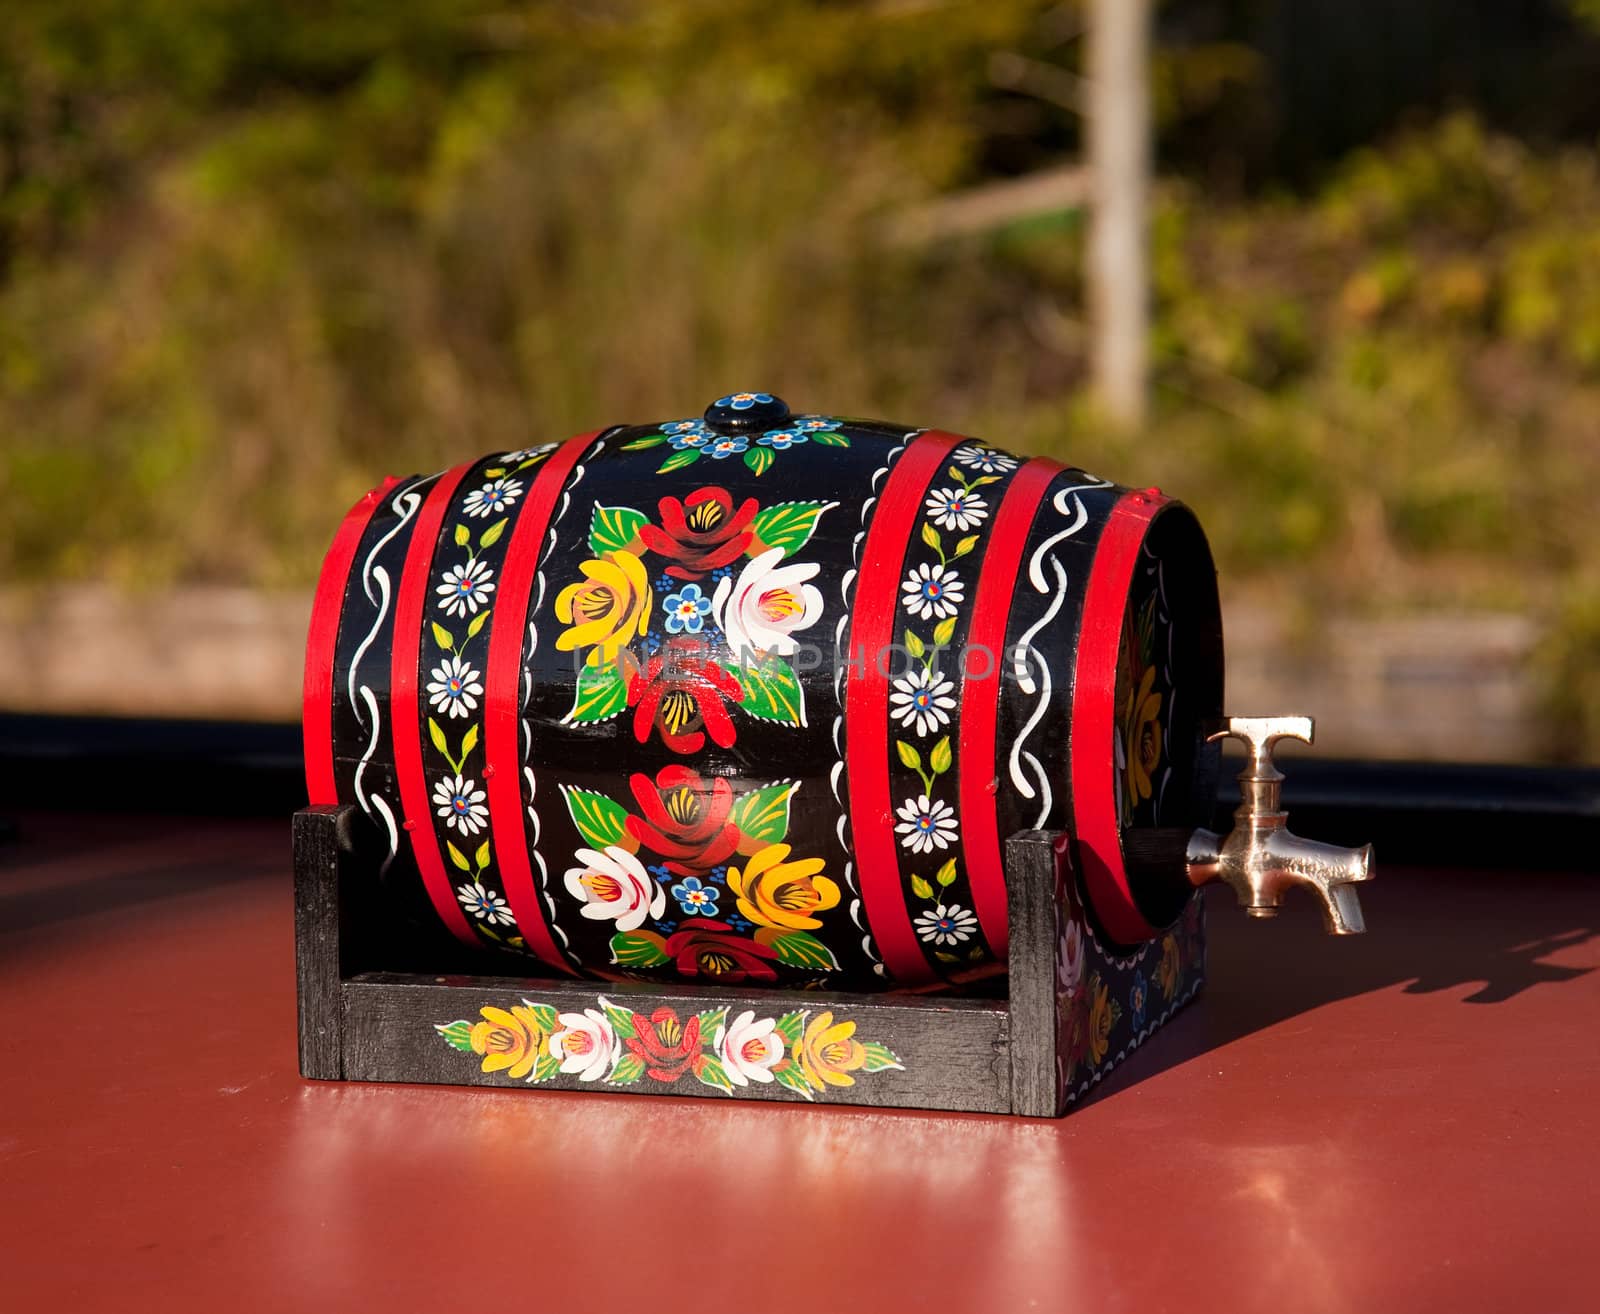 Hand painted traditional decorated drinking barrel by steheap